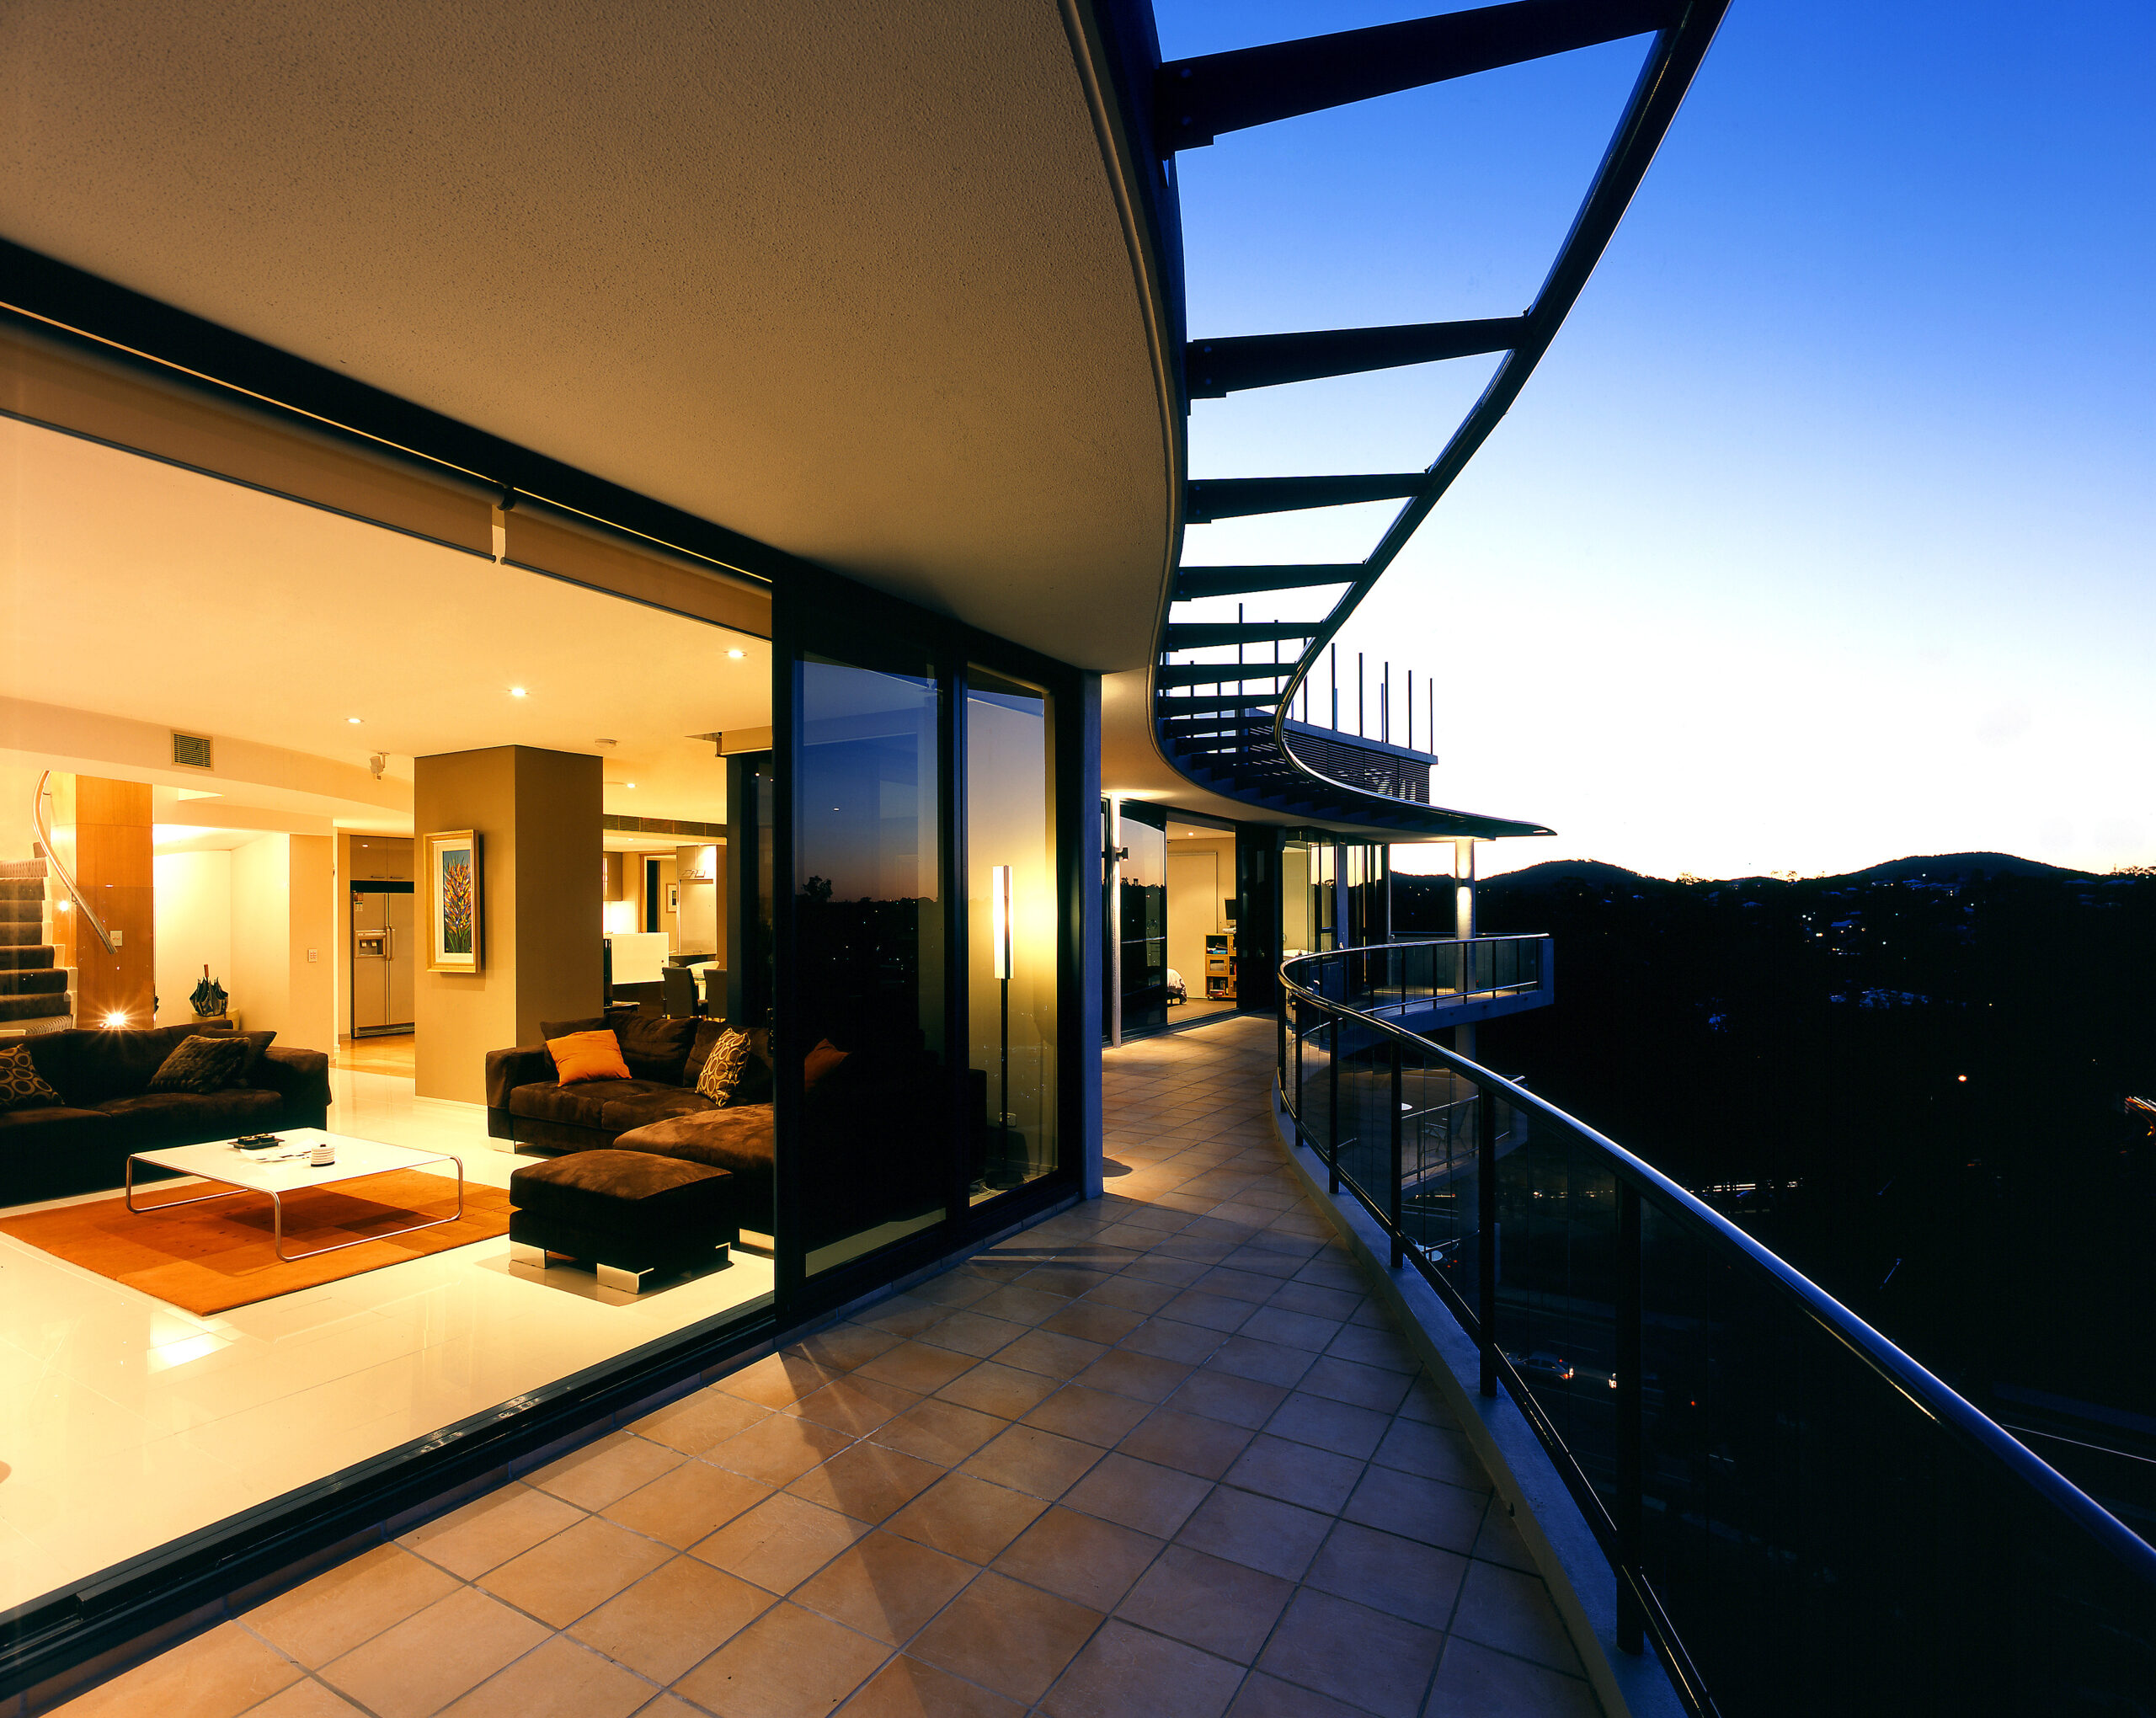 View across the balcony of a penthouse apartment showcasing scenic views towards the west of Brisbane